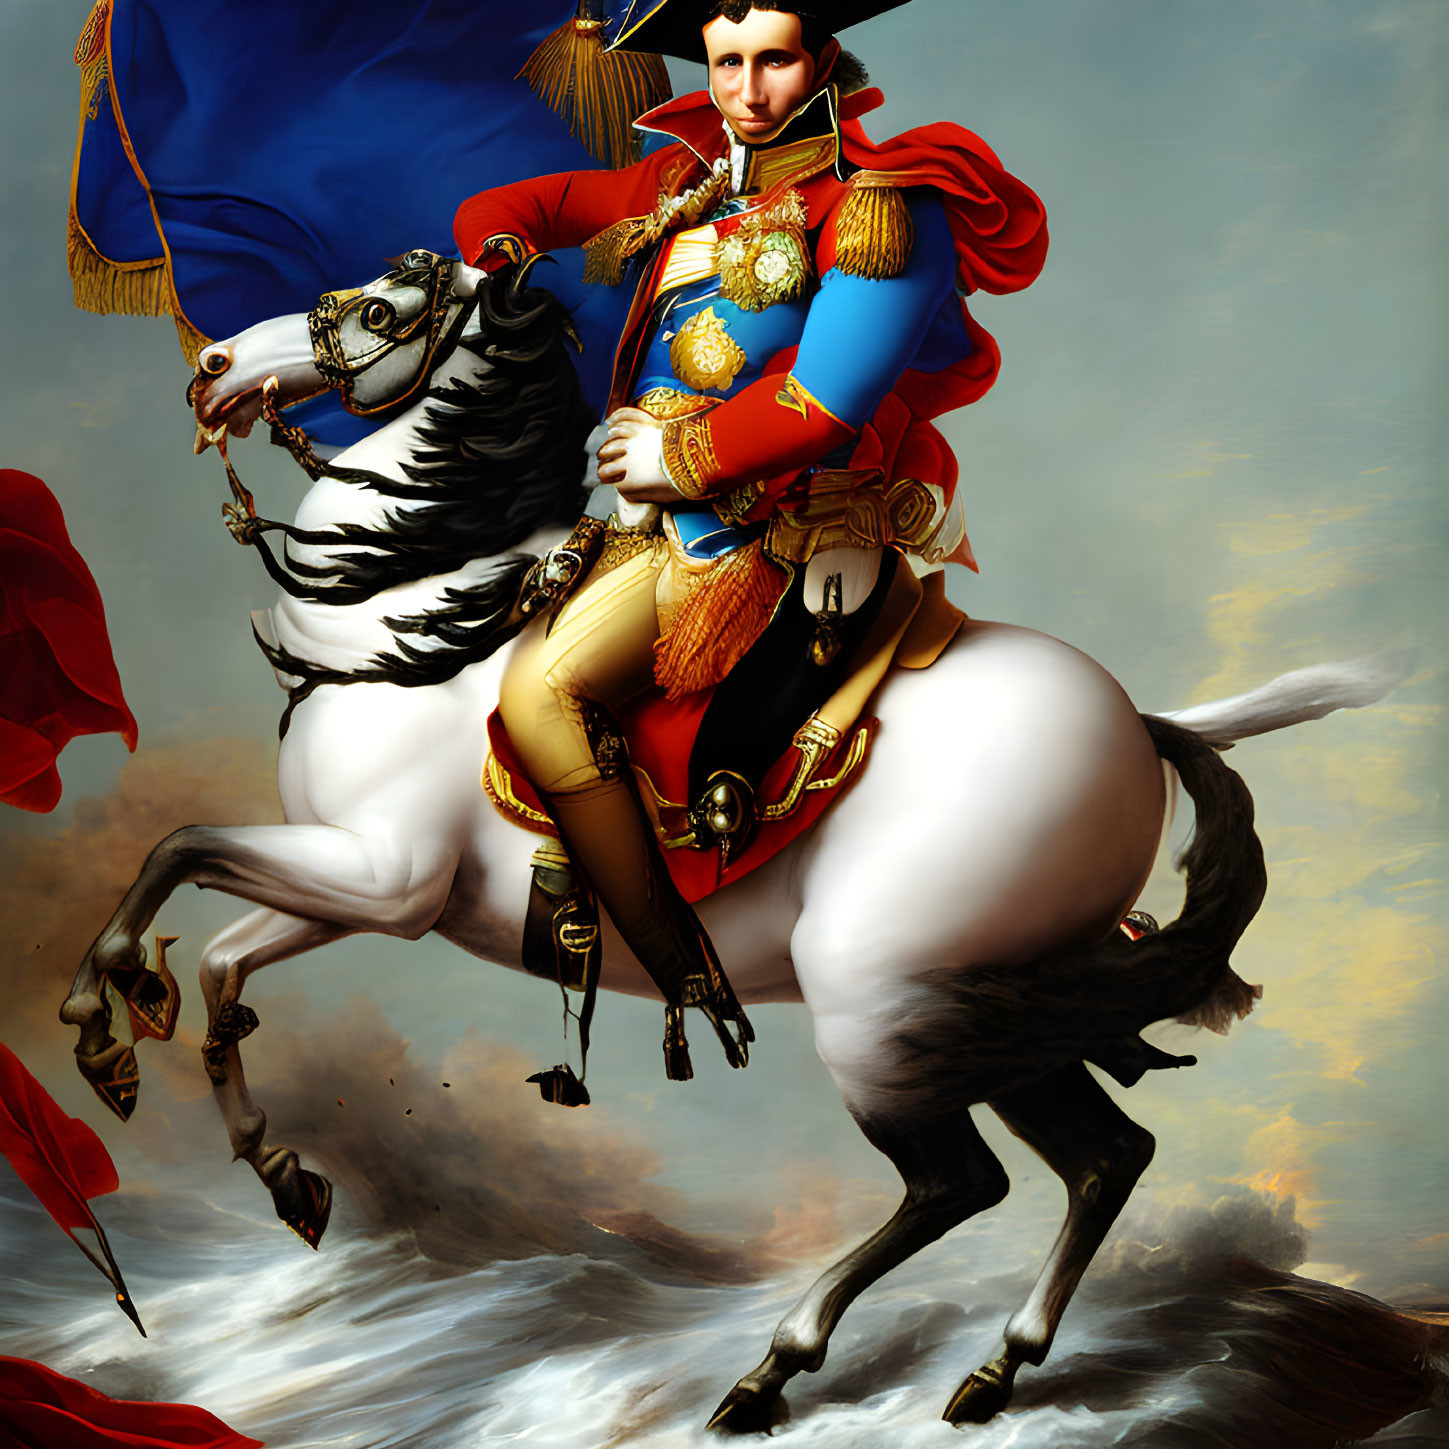 Regal figure in blue uniform on horseback with gold decorations against sky background.